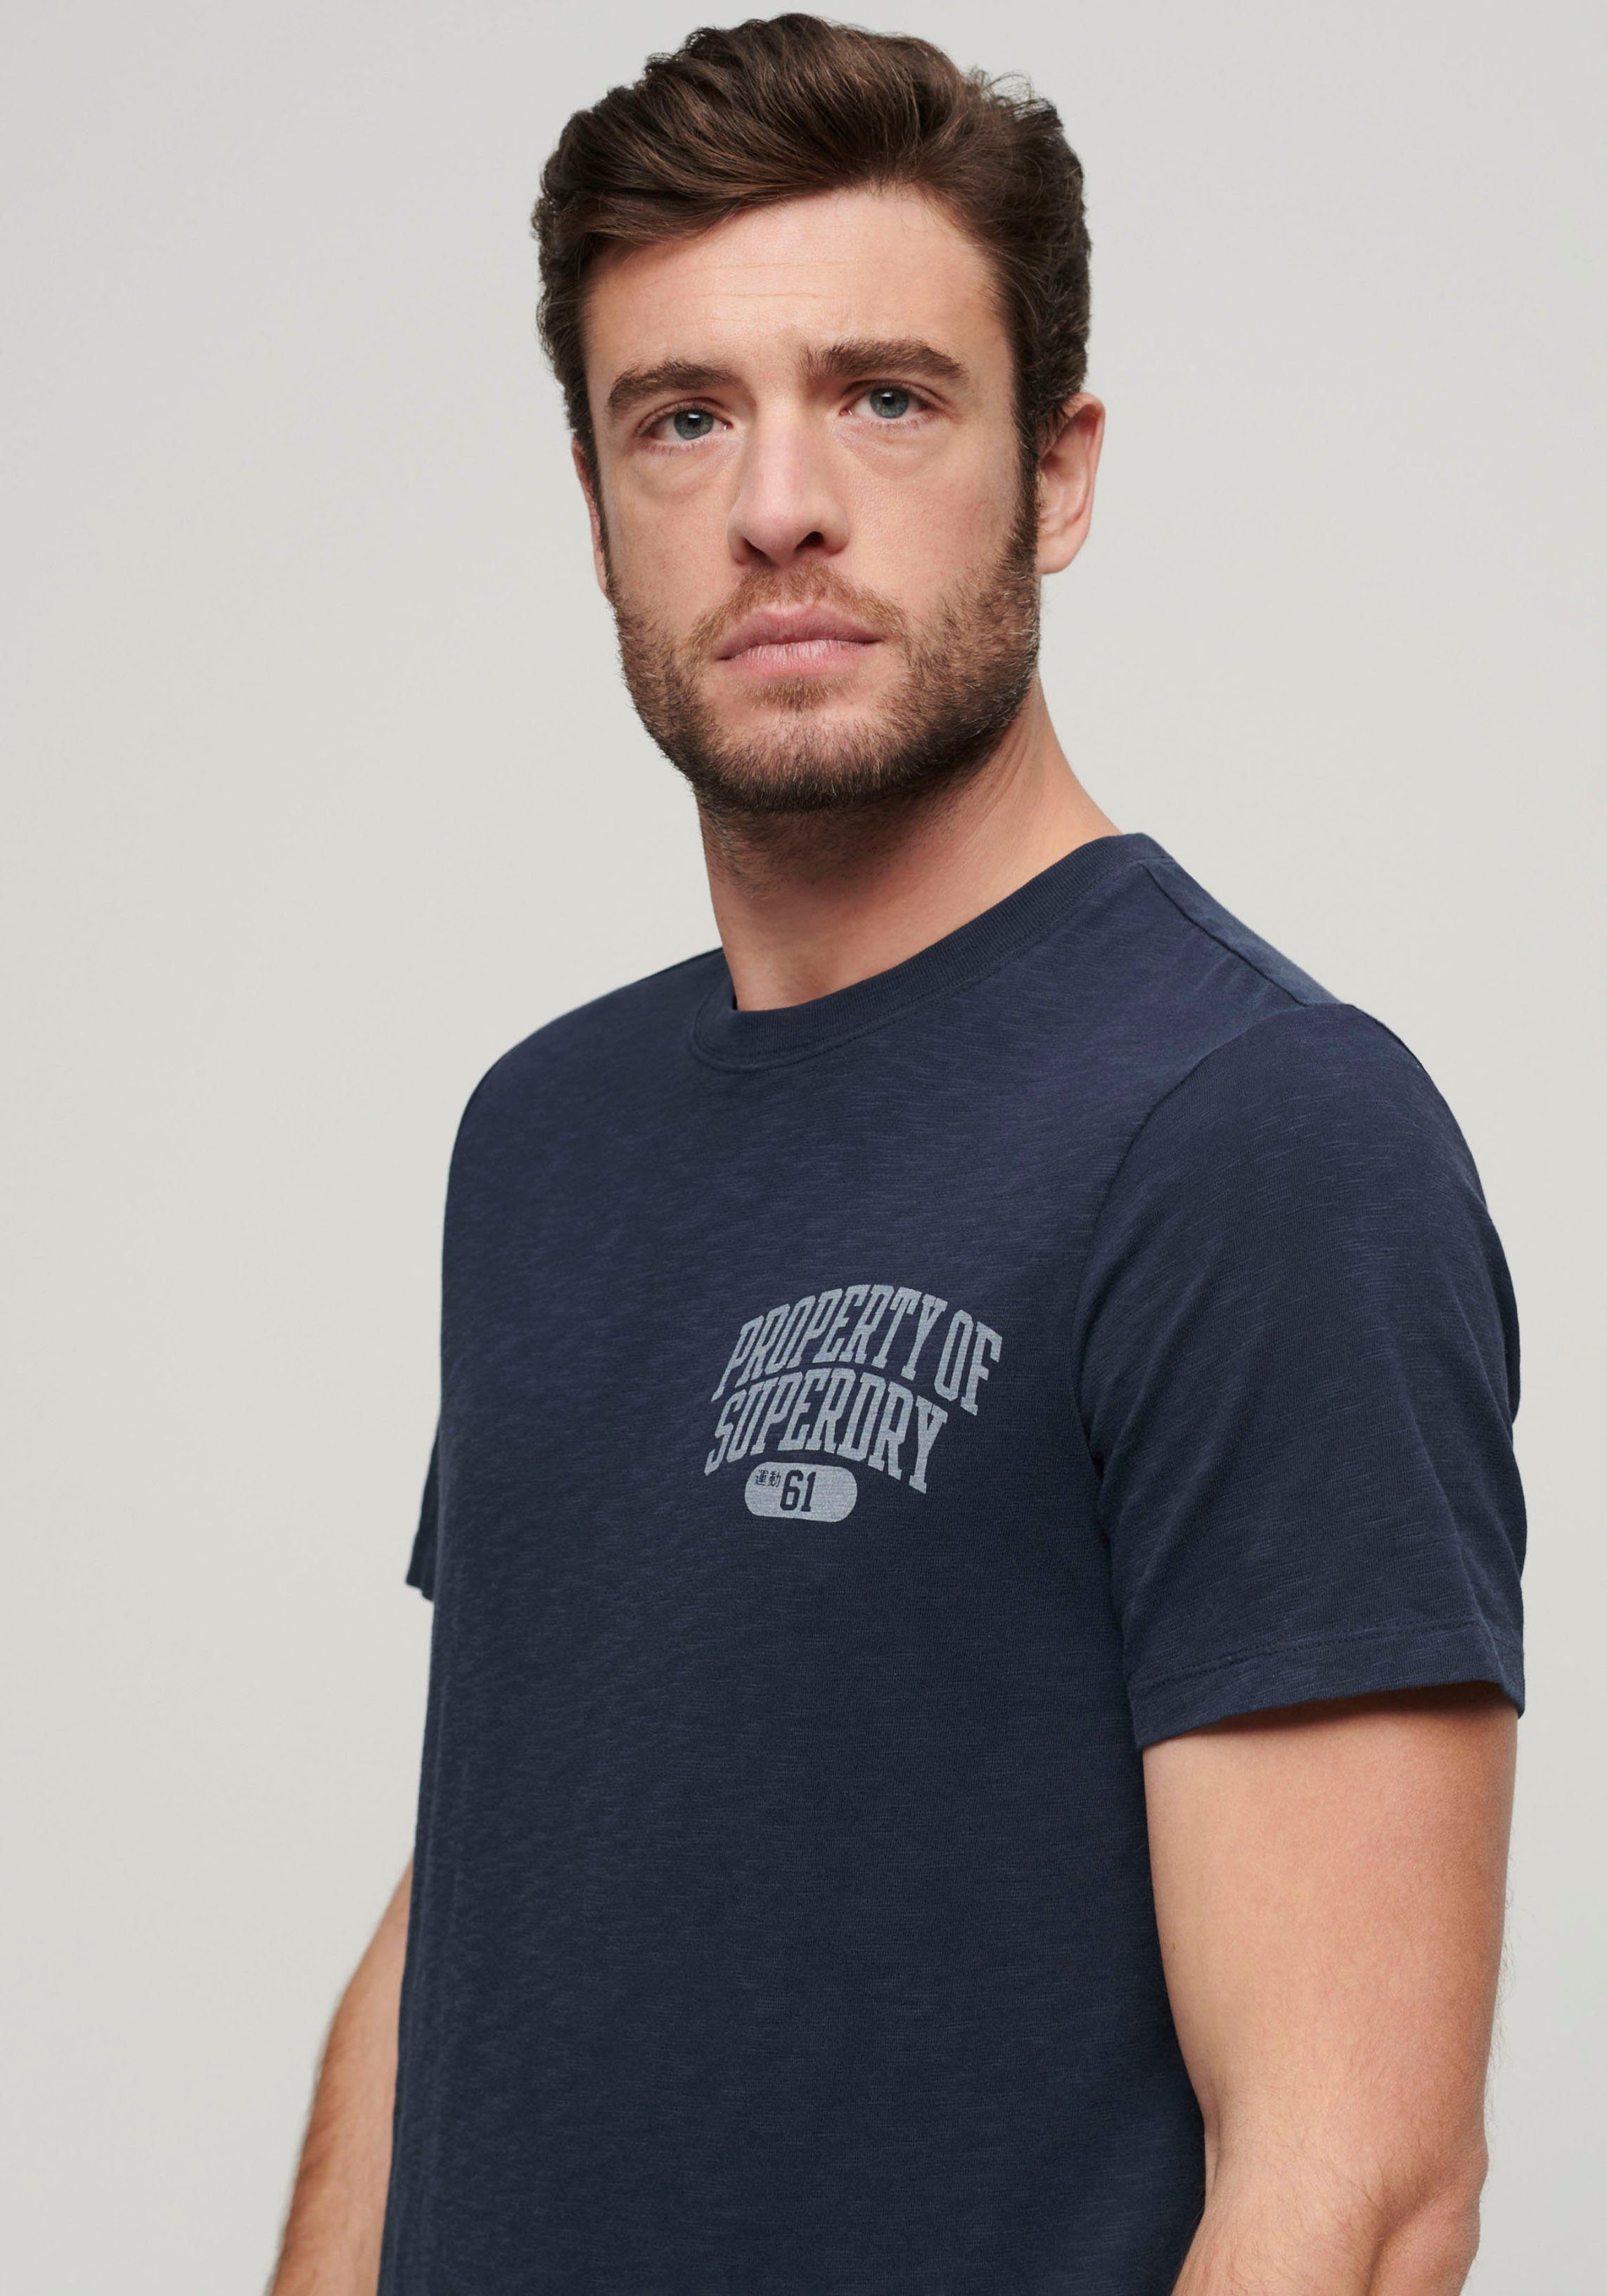 Superdry T-shirt ATHLETIC COLLEGE GRAPHIC TEE